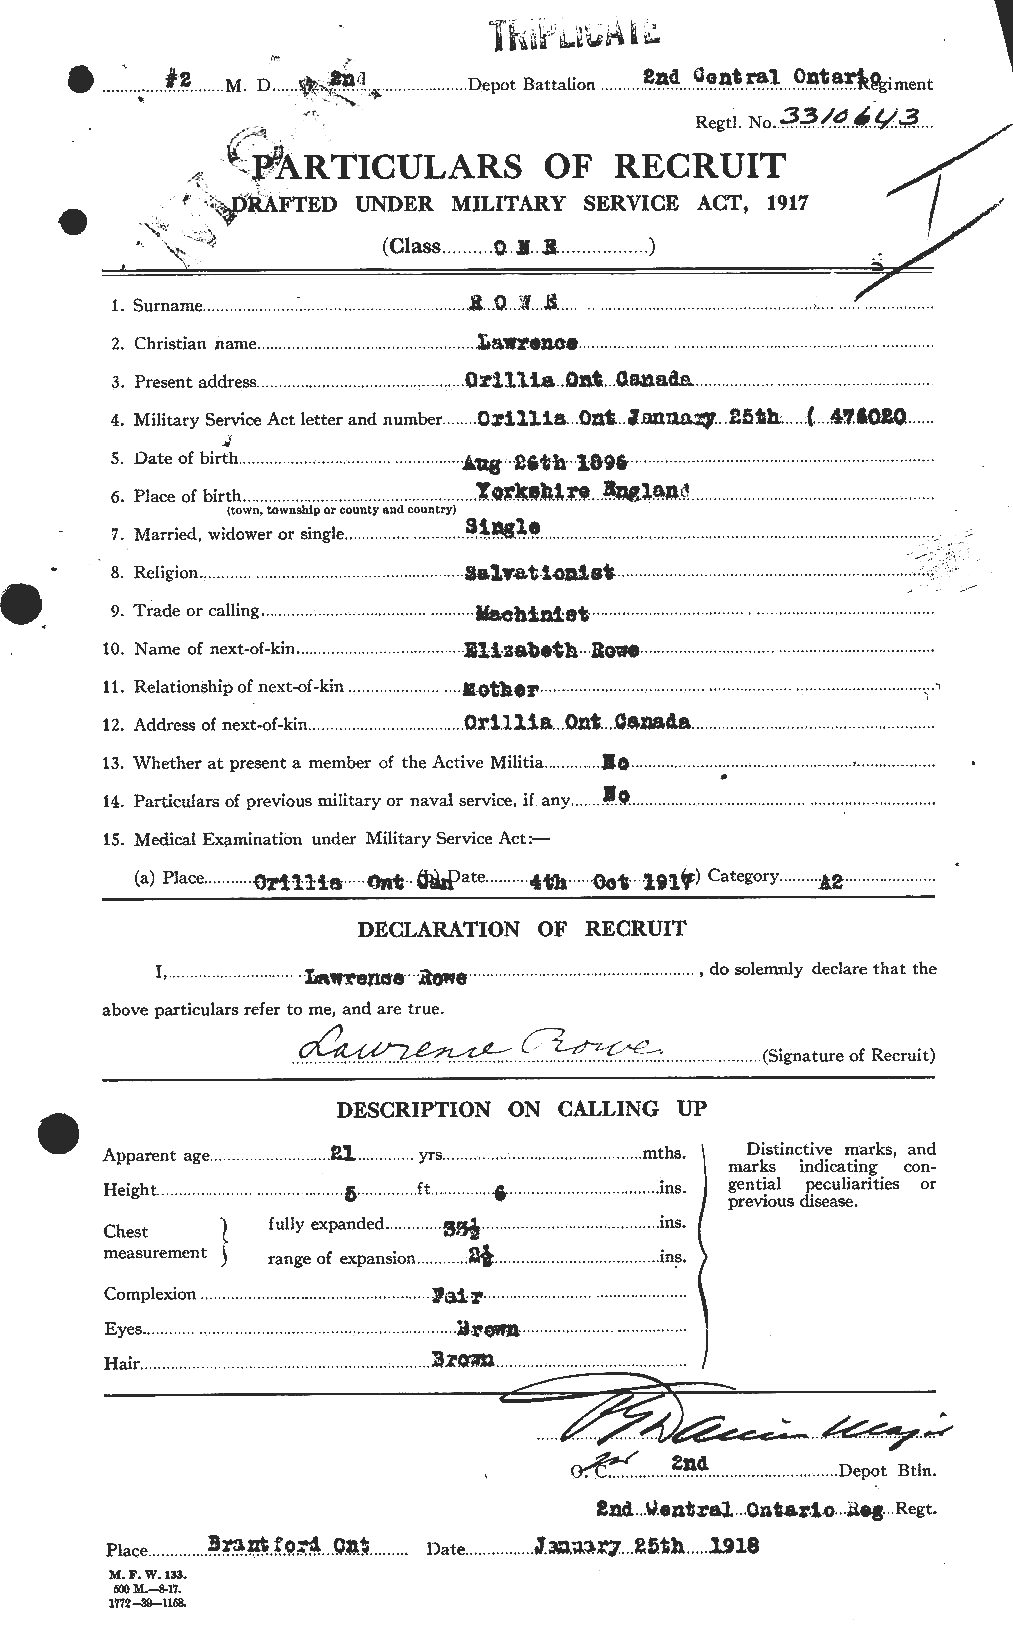 Personnel Records of the First World War - CEF 615944a